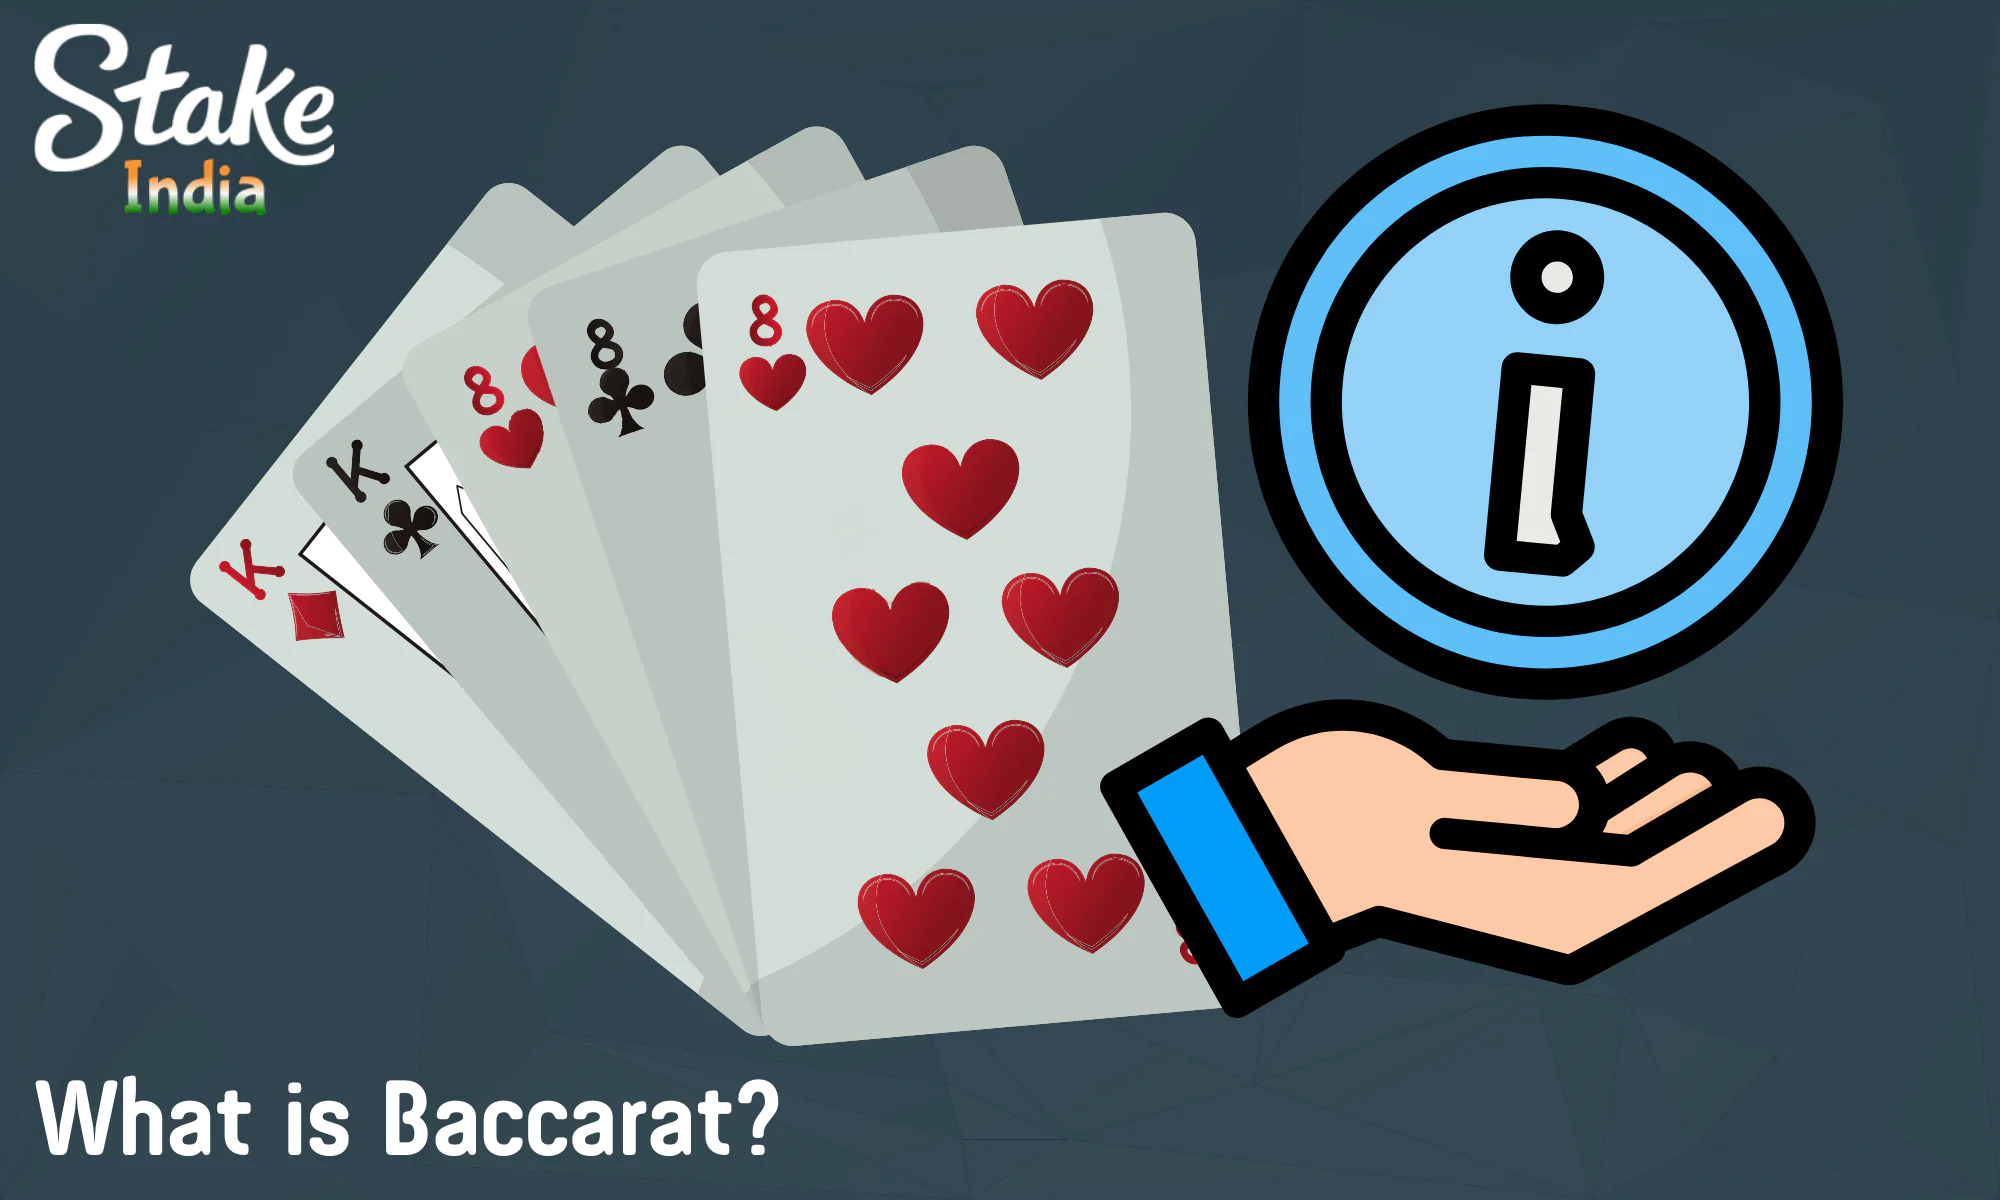 Detailed information about the game Baccarat at Stake casino